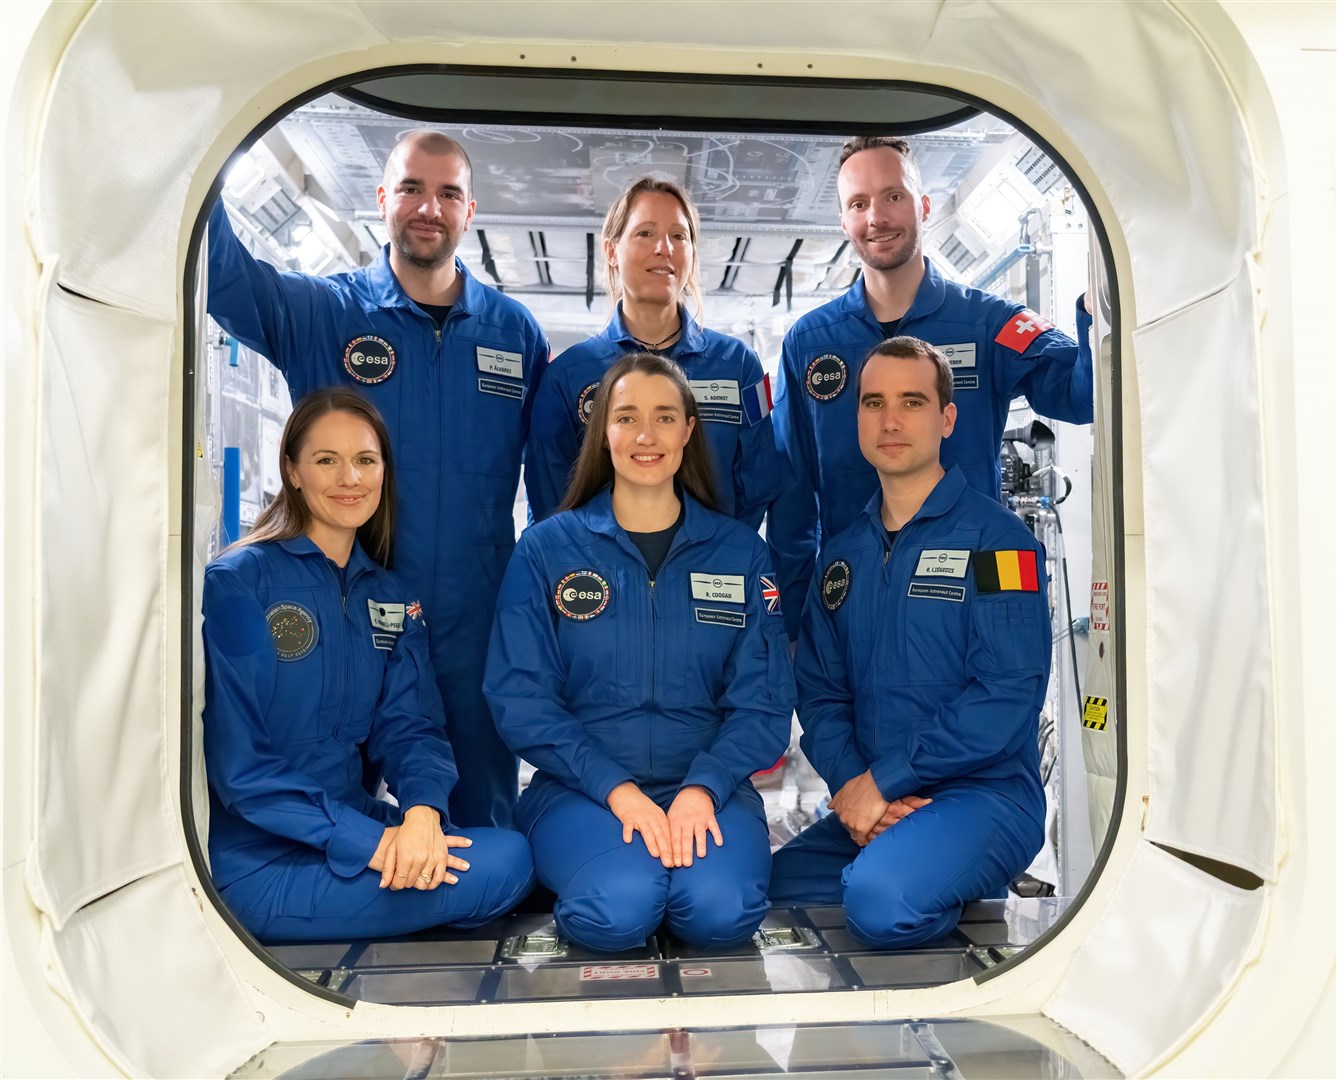 Rosemary Coogan, centre, with colleagues, from left, Pablo Alvarez Fernandez, Sophie Adenot, Marco Sieber, Australia’s Katherine Bennell-Pegg and Raphael Liegeois (P. Sebirot/ESA)